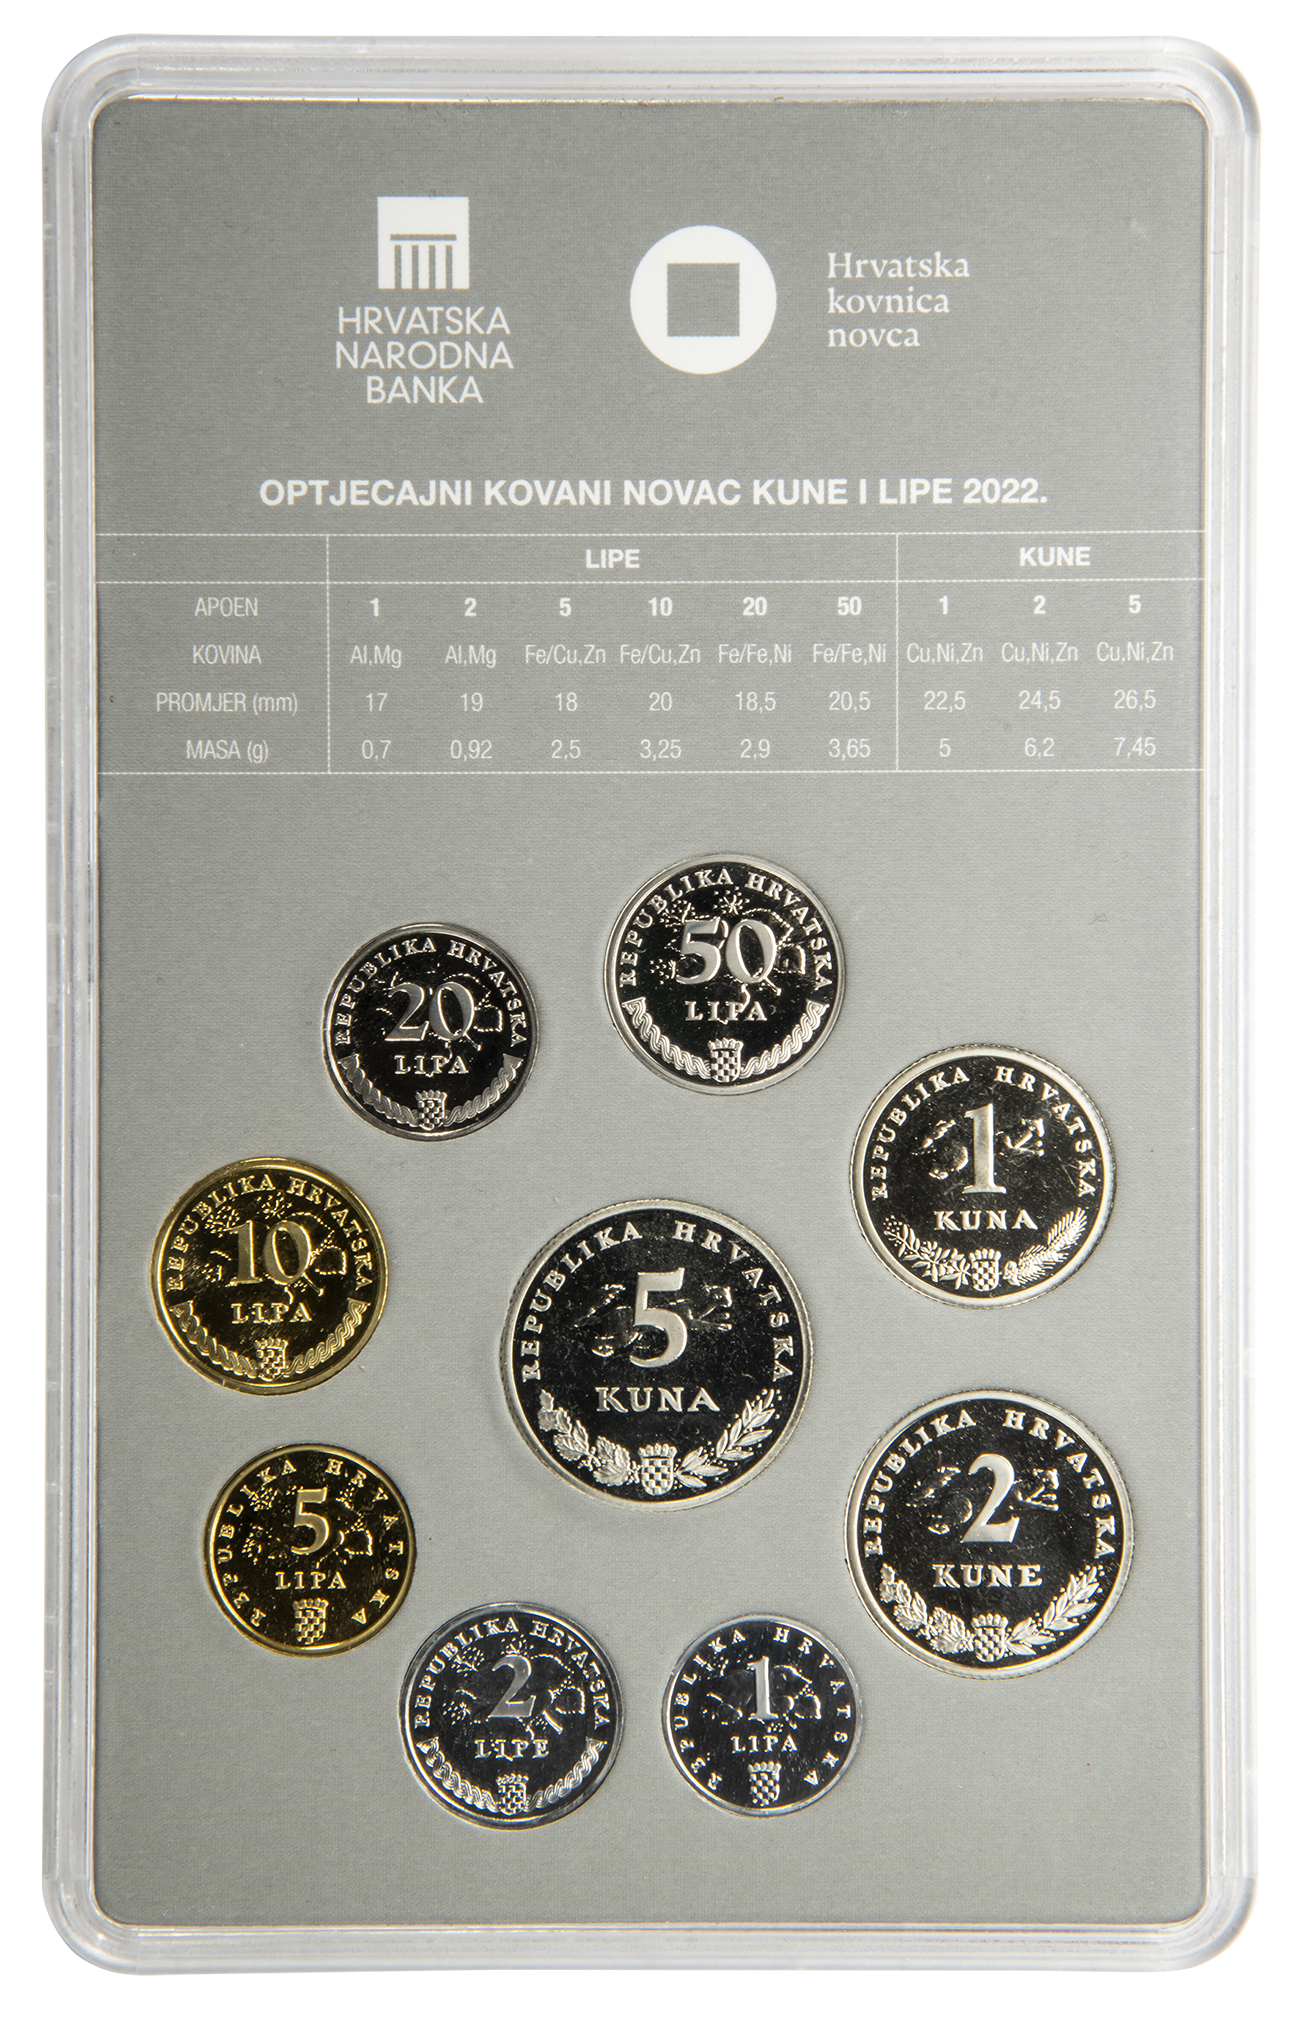 Numismatic set of circulation coins with mint year 2022